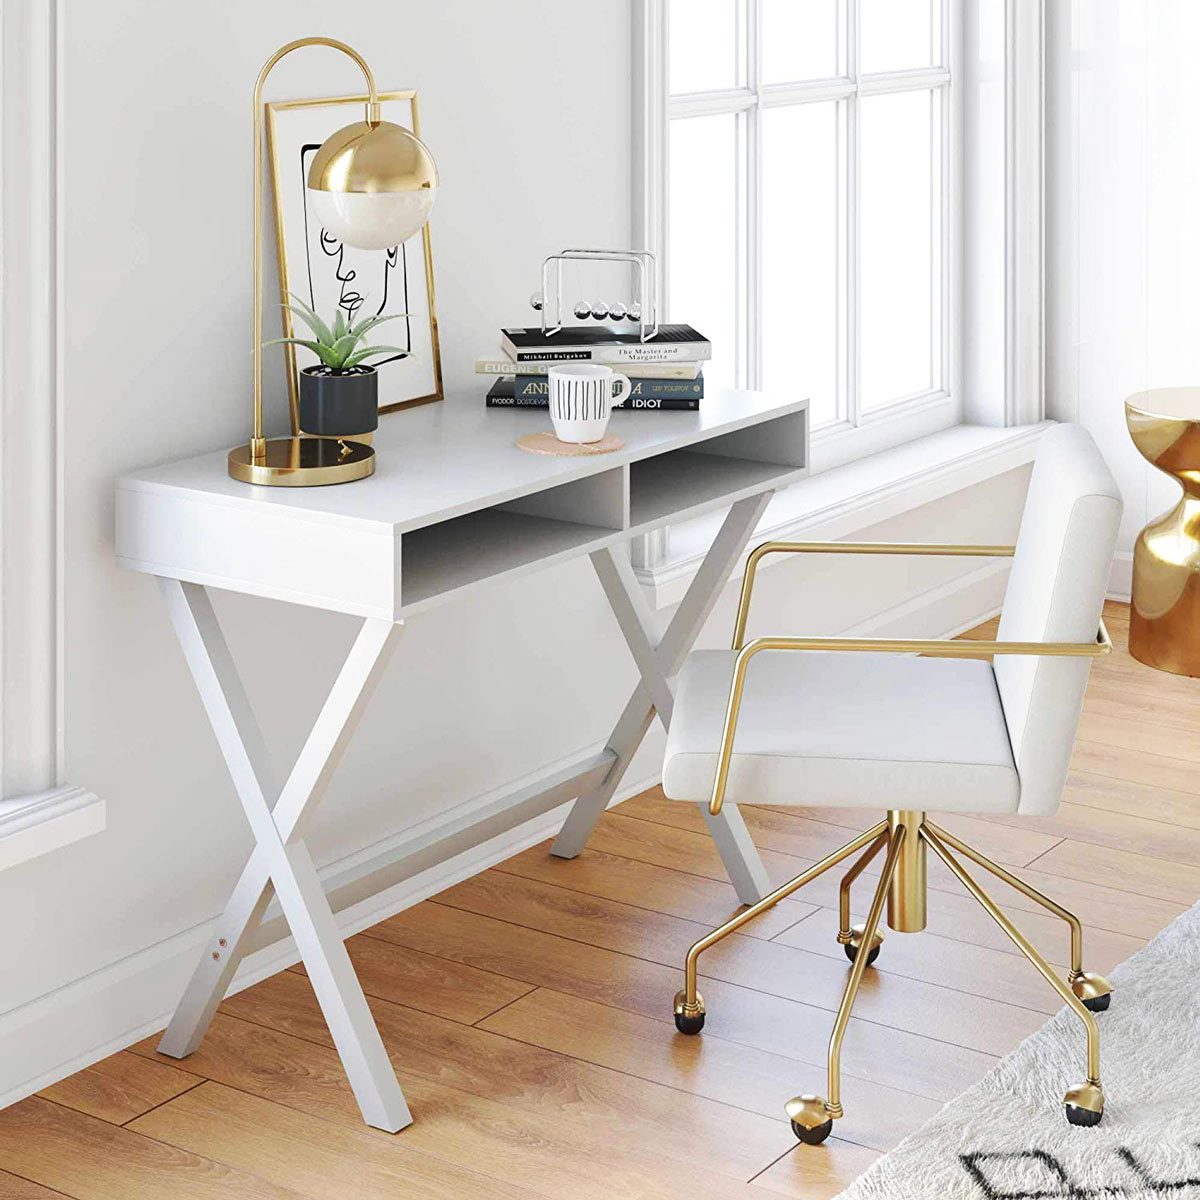 Home Office Desk Ideas for Anyone and Any Space | Family Handyman